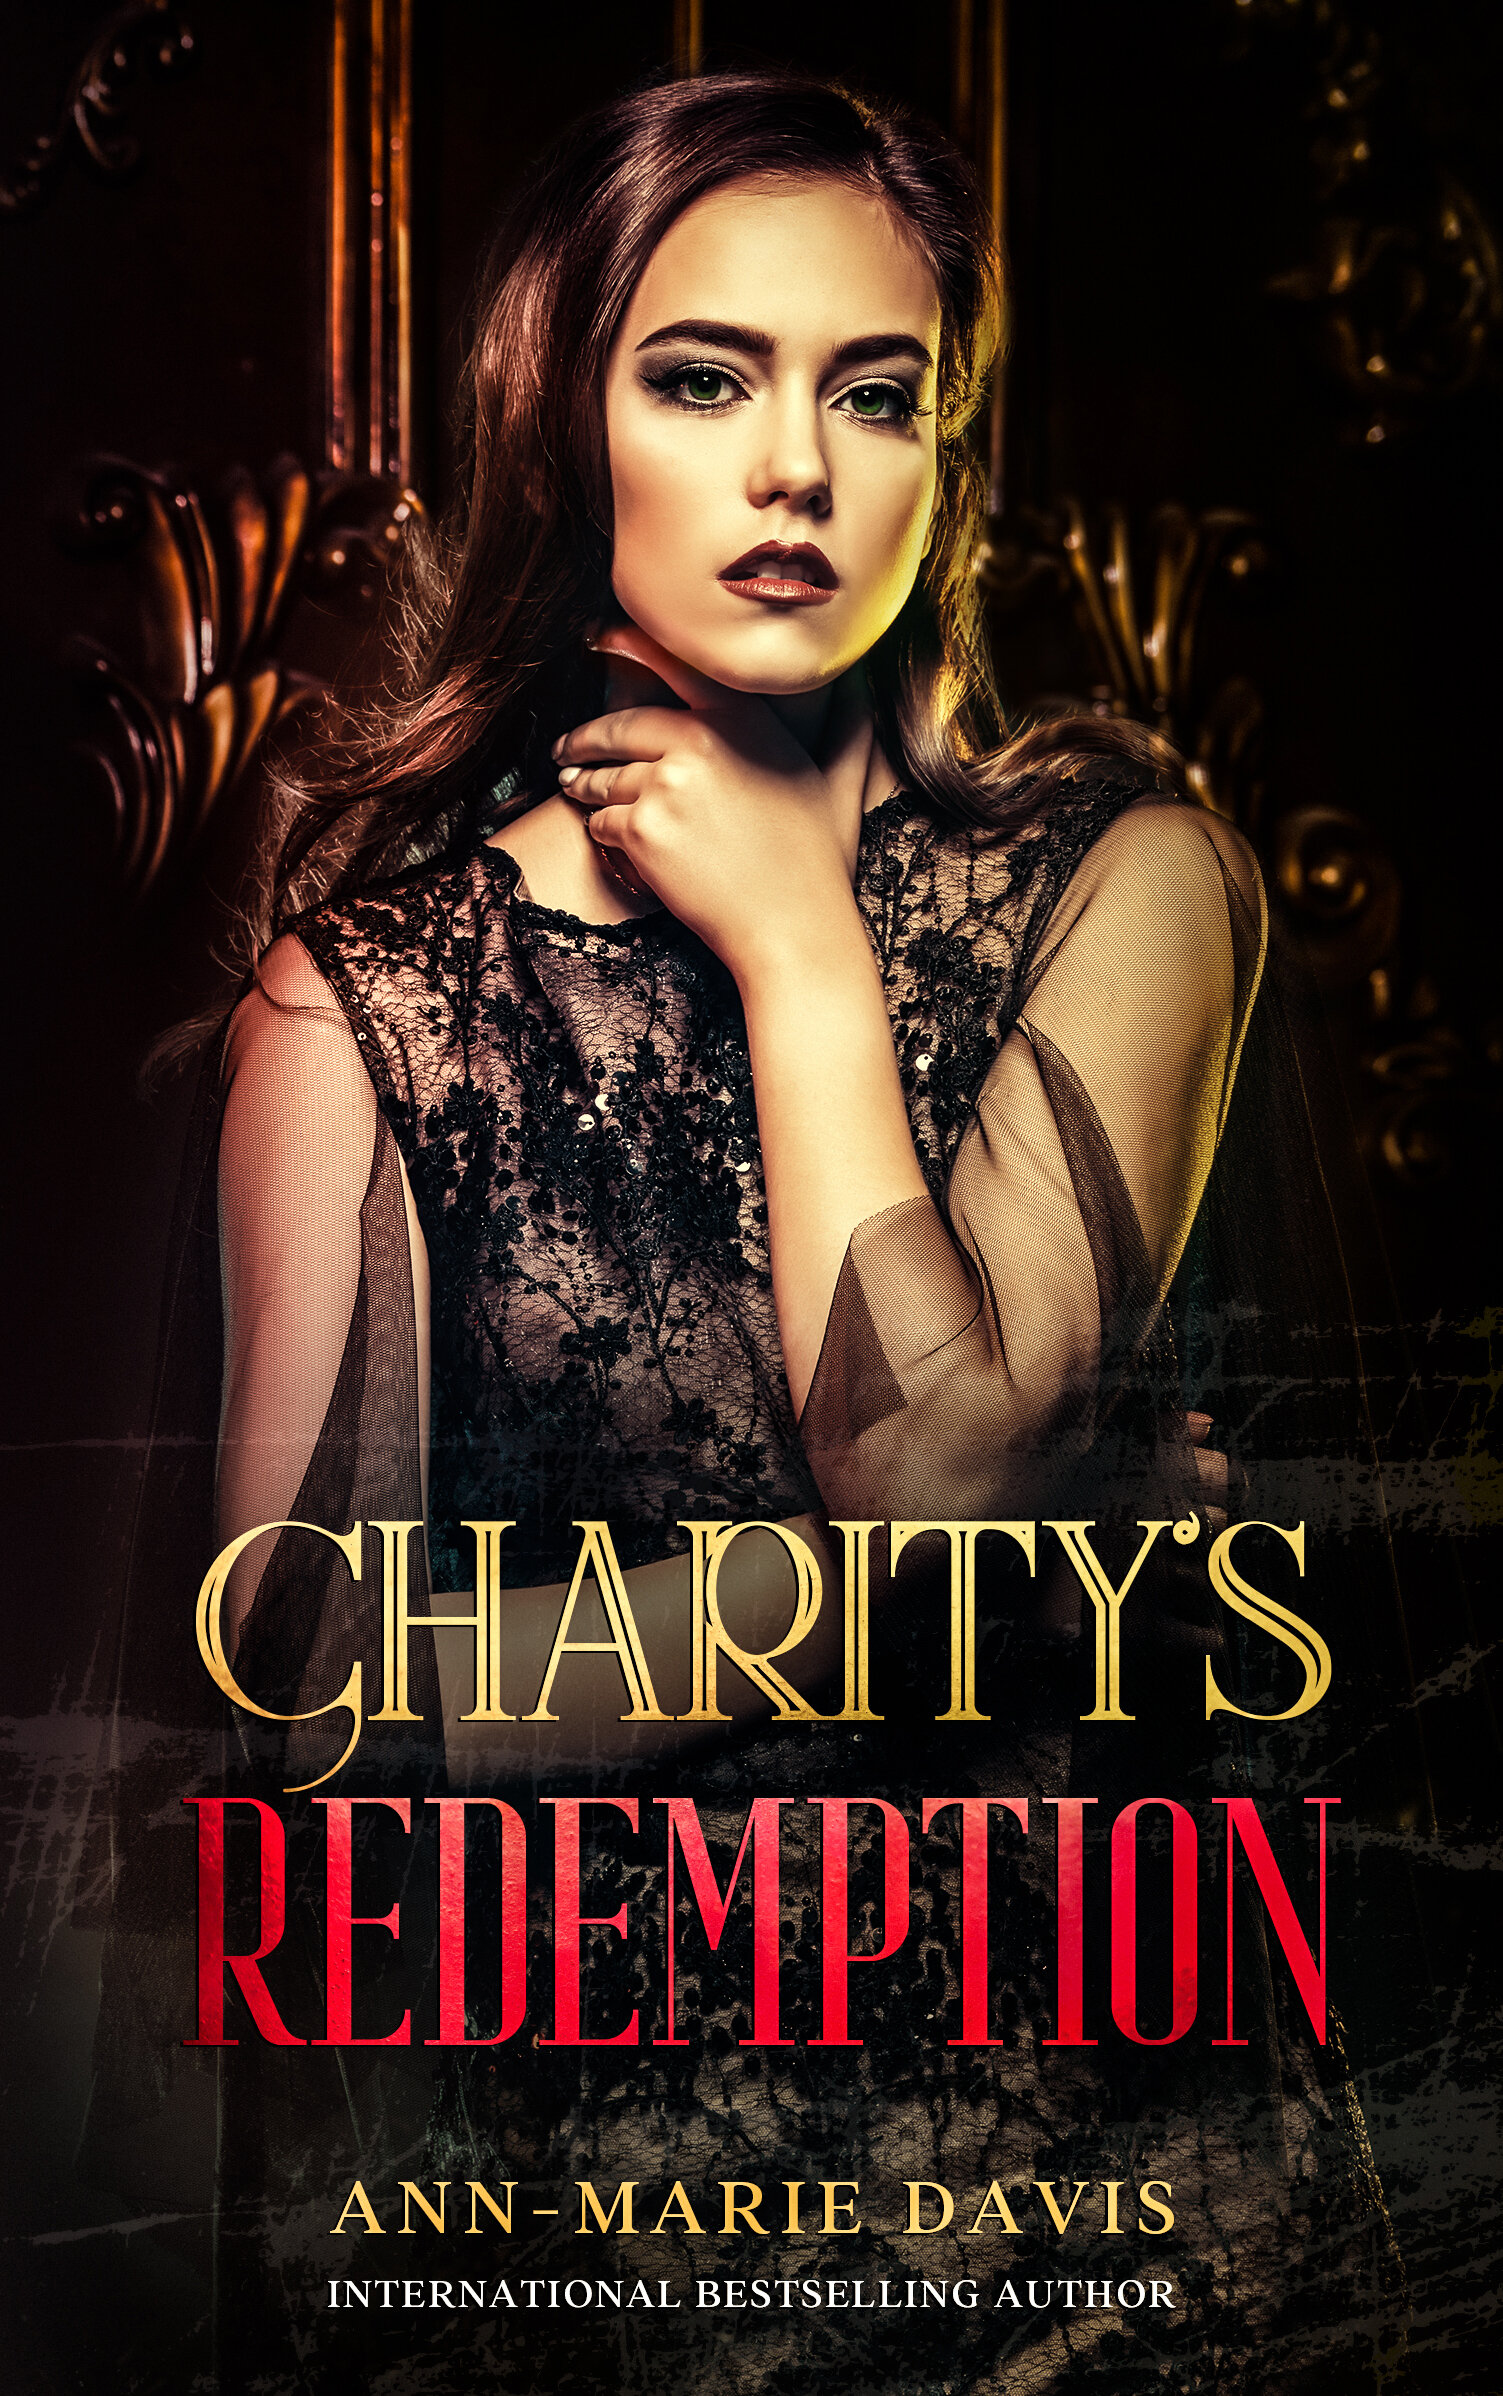 FREE: Charity’s Redemption by Ann-Marie Davis